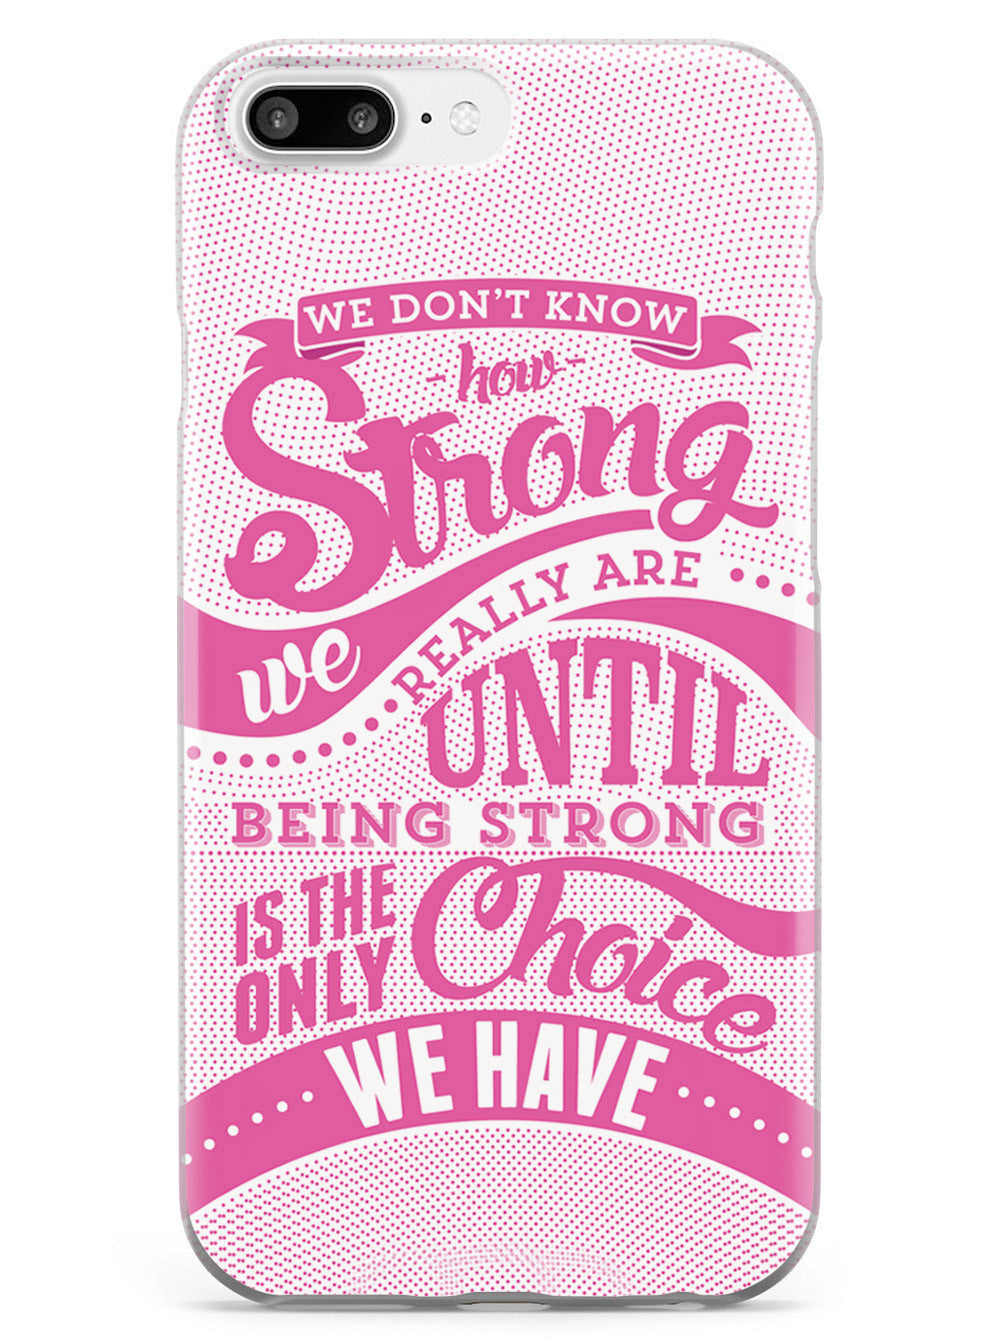 How Strong - Pink Awareness/Support Case